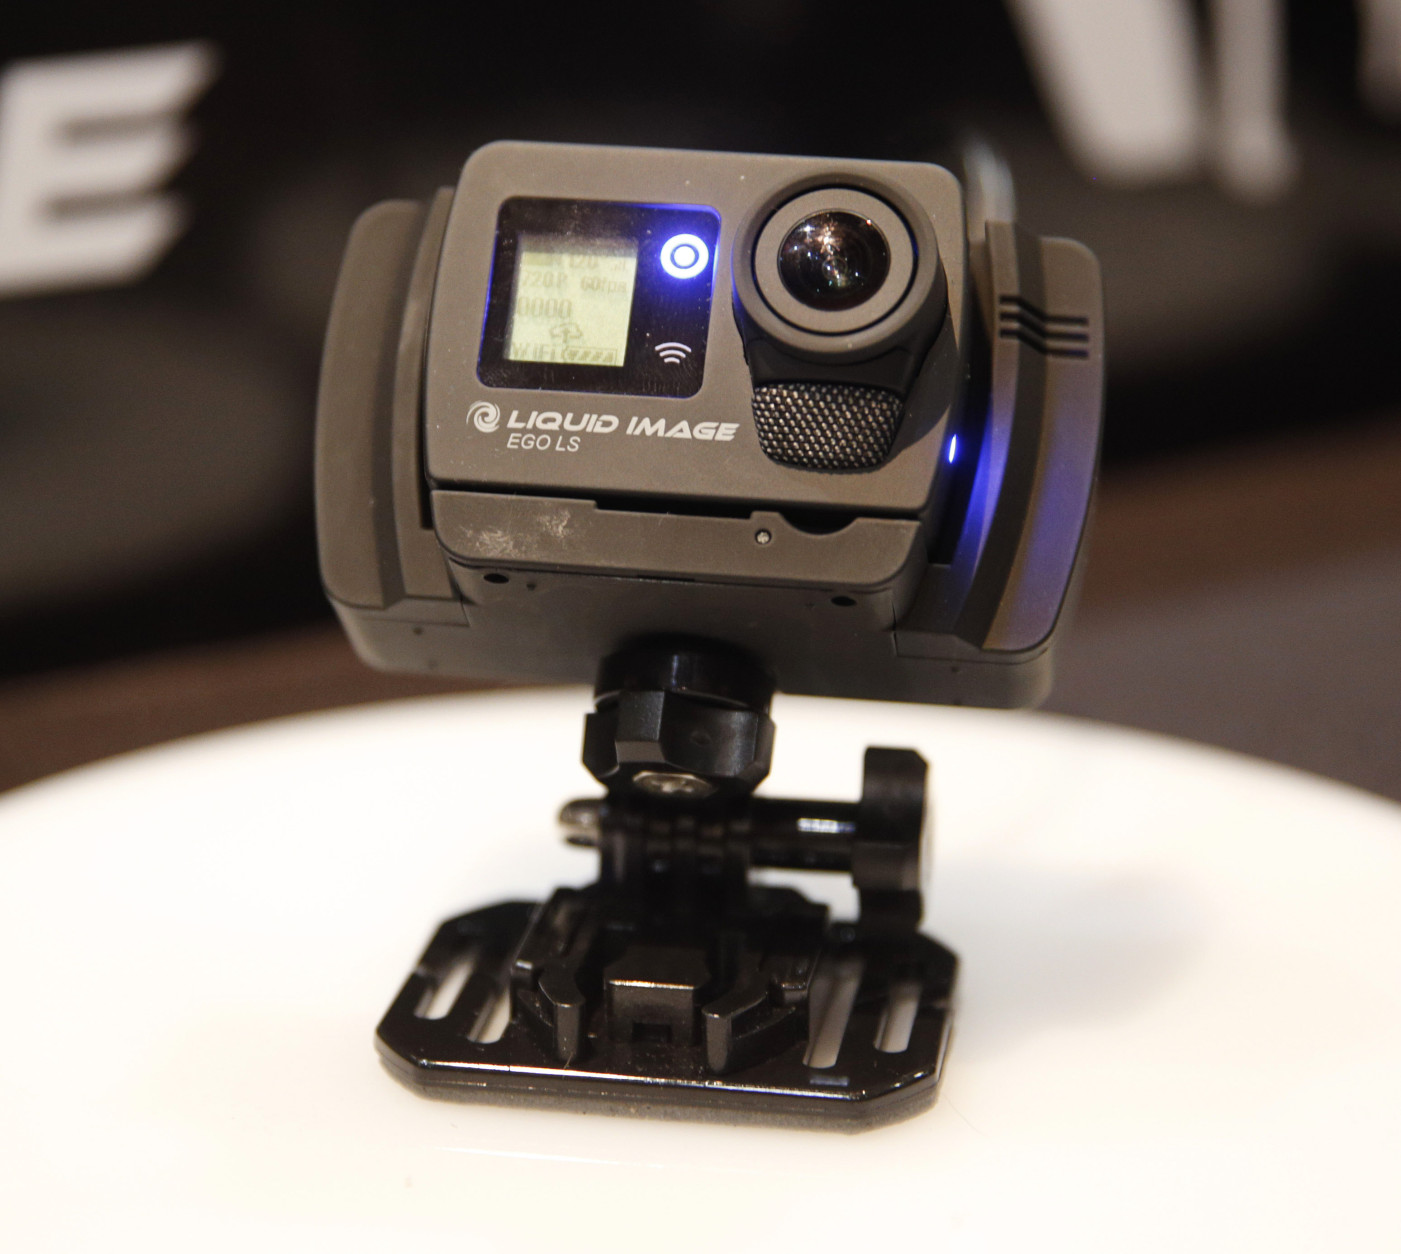 The Liquid Image EGO LS-800 wearable and mountable 4G enabled camera is on display at CES Unveiled, a media preview event for CES International, Sunday, Jan. 4, 2015, in Las Vegas. (AP Photo/John Locher)